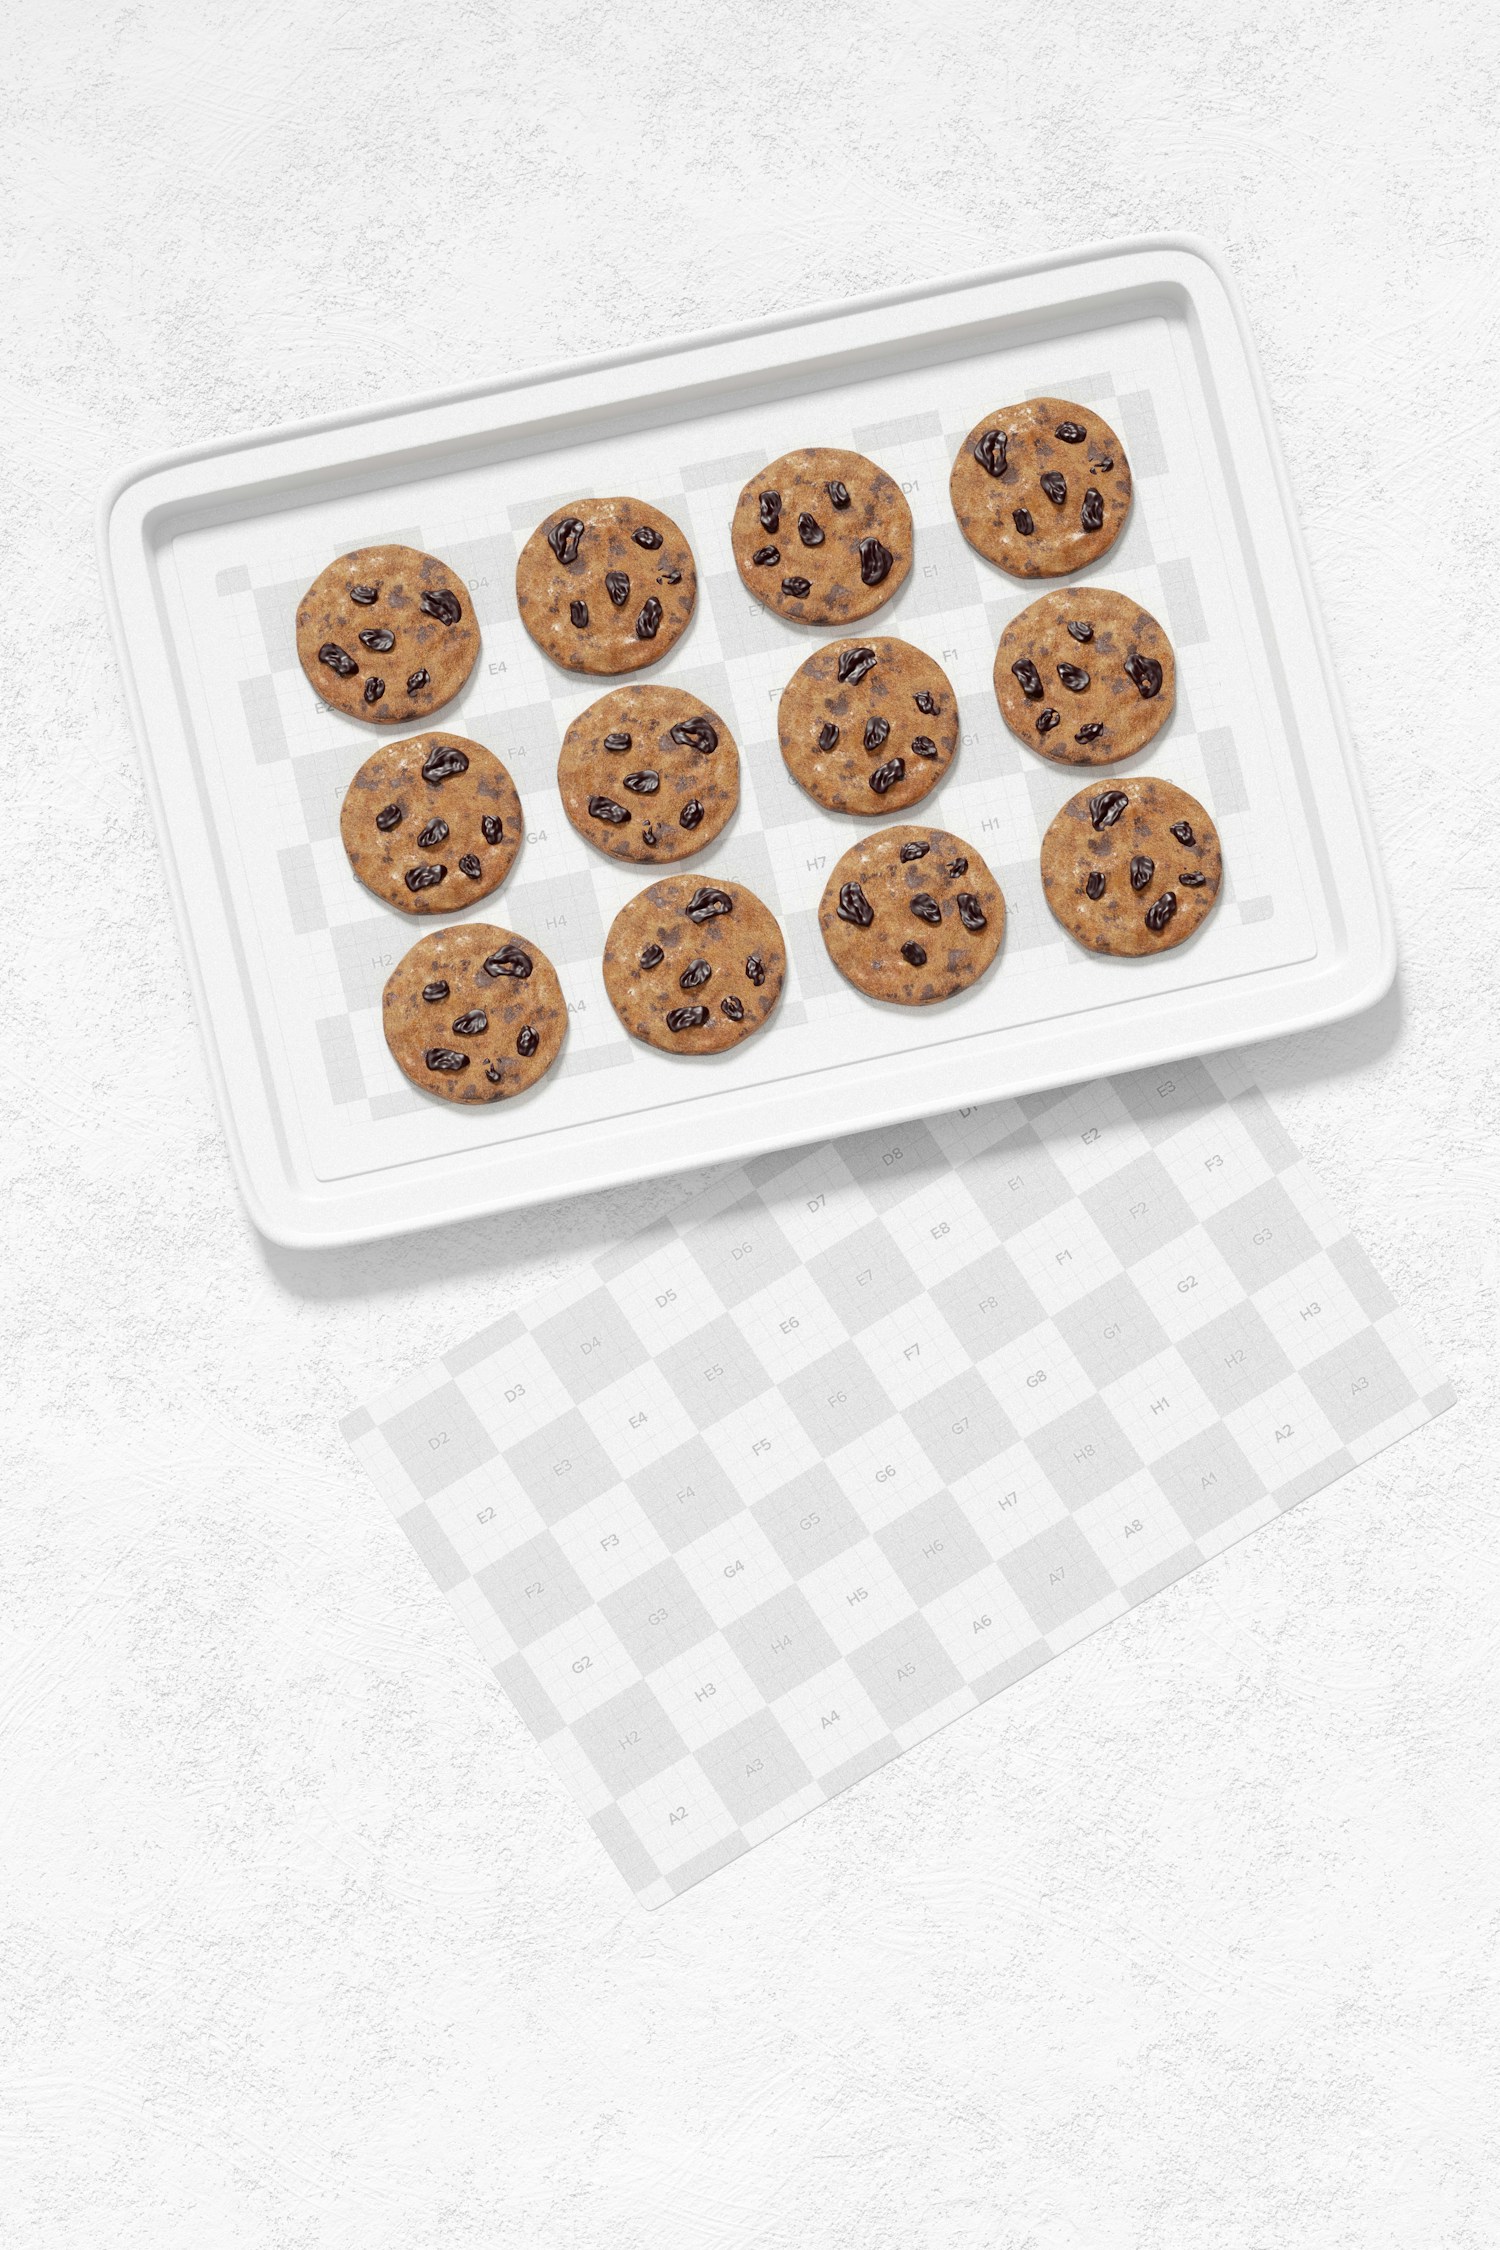 Baking Tray with Cookies Mockup